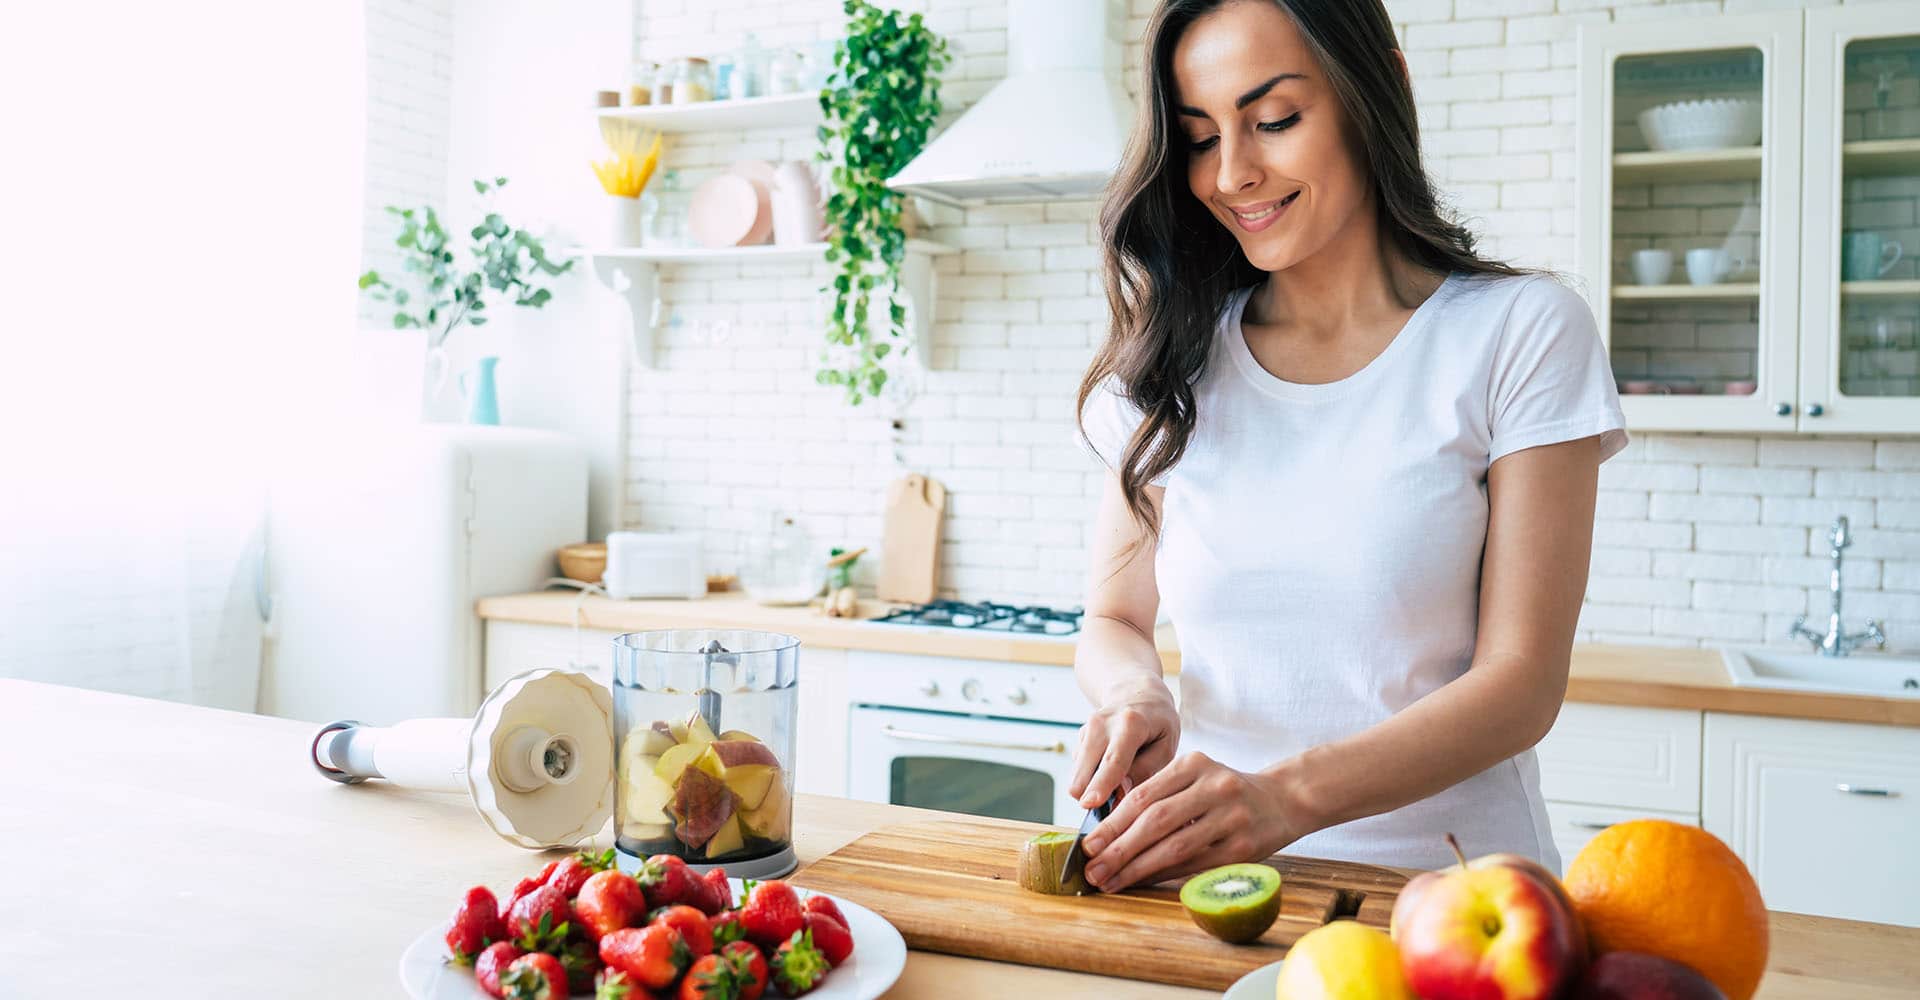 Woman prepares fruit to strengthen her immune system